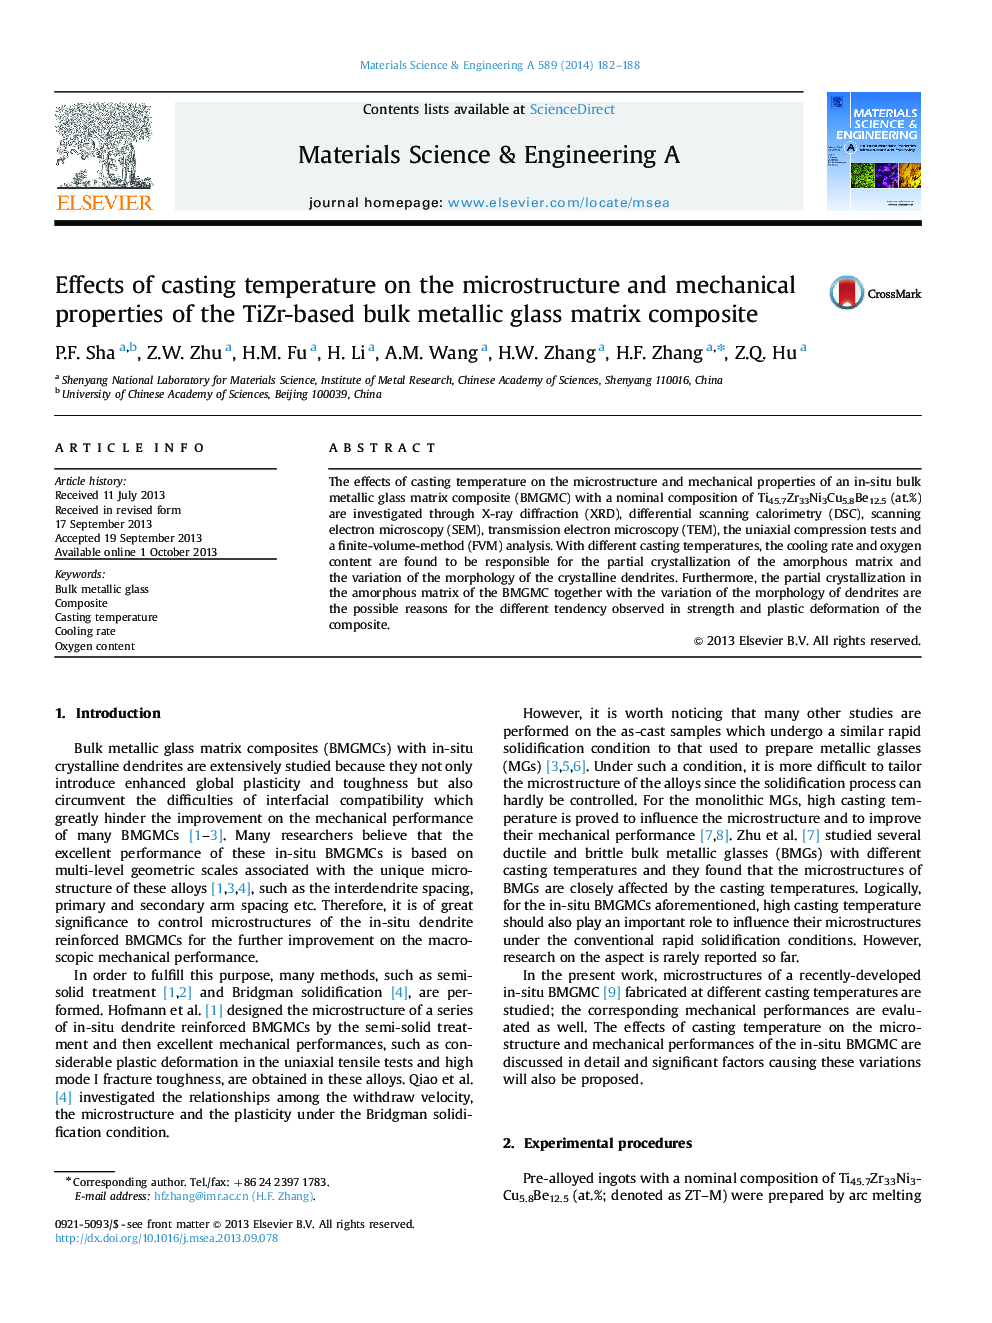 Effects of casting temperature on the microstructure and mechanical properties of the TiZr-based bulk metallic glass matrix composite